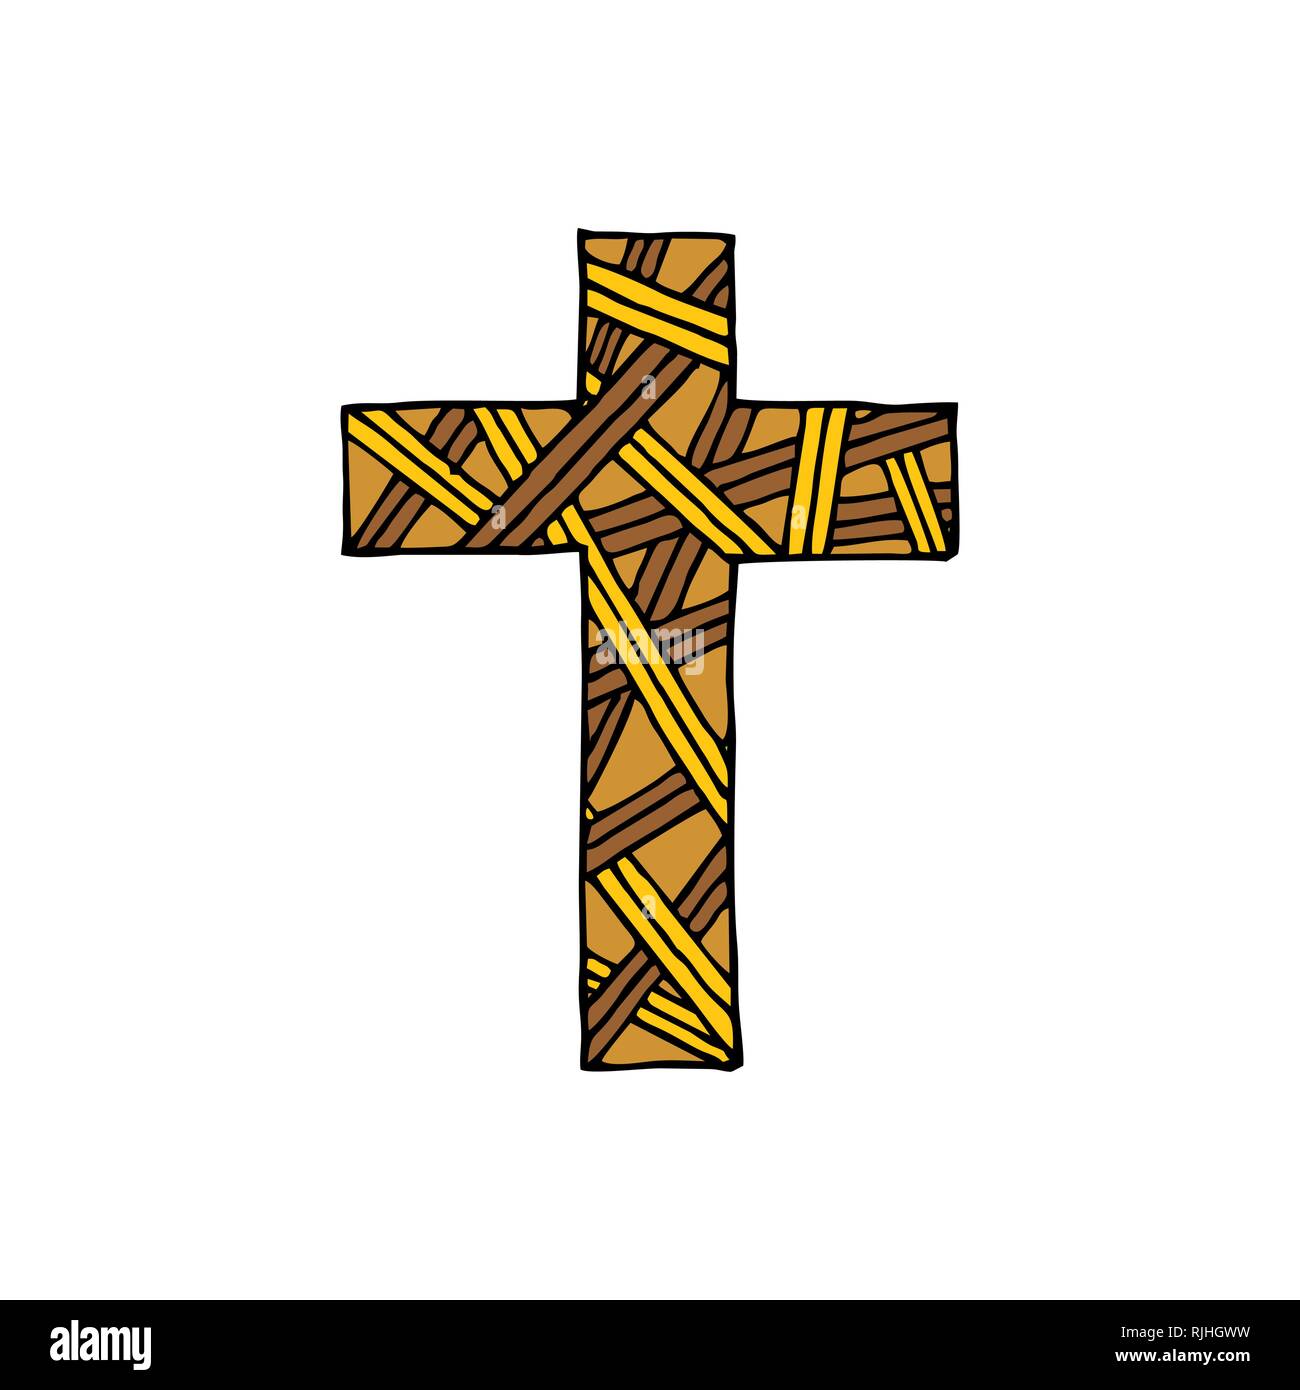 Cross of the Lord and Savior Jesus Christ with interlacings, hand-drawn. Christian and biblical symbols. Stock Vector